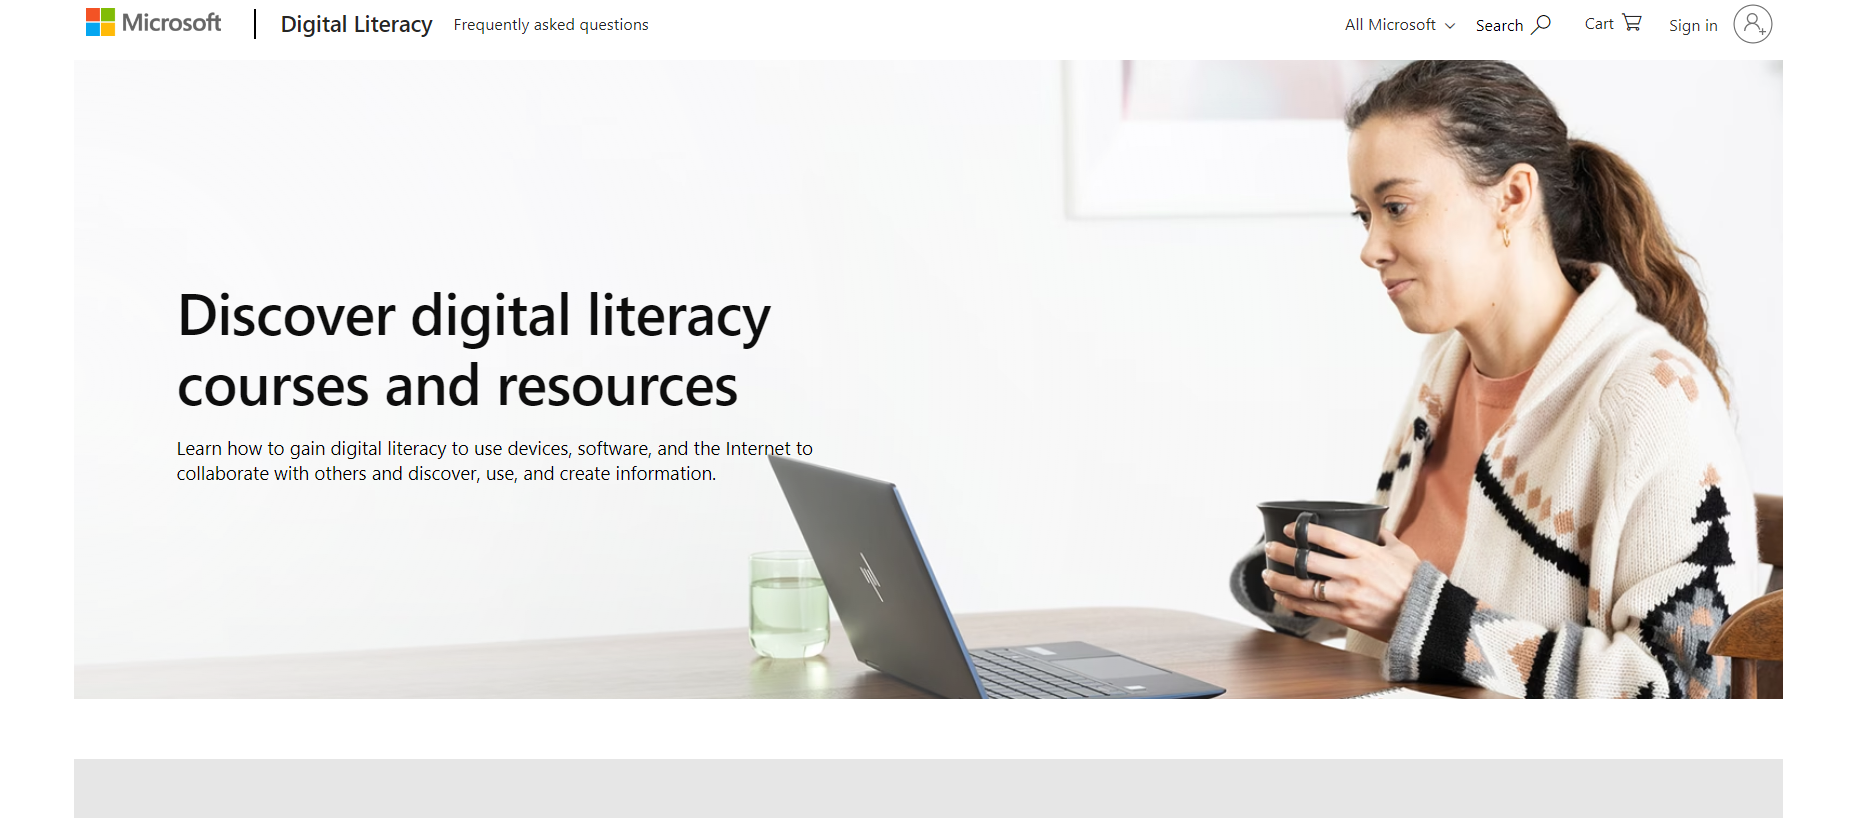 How to Register Microsoft Digital Literacy Certificate: A Step-by-Step Guide